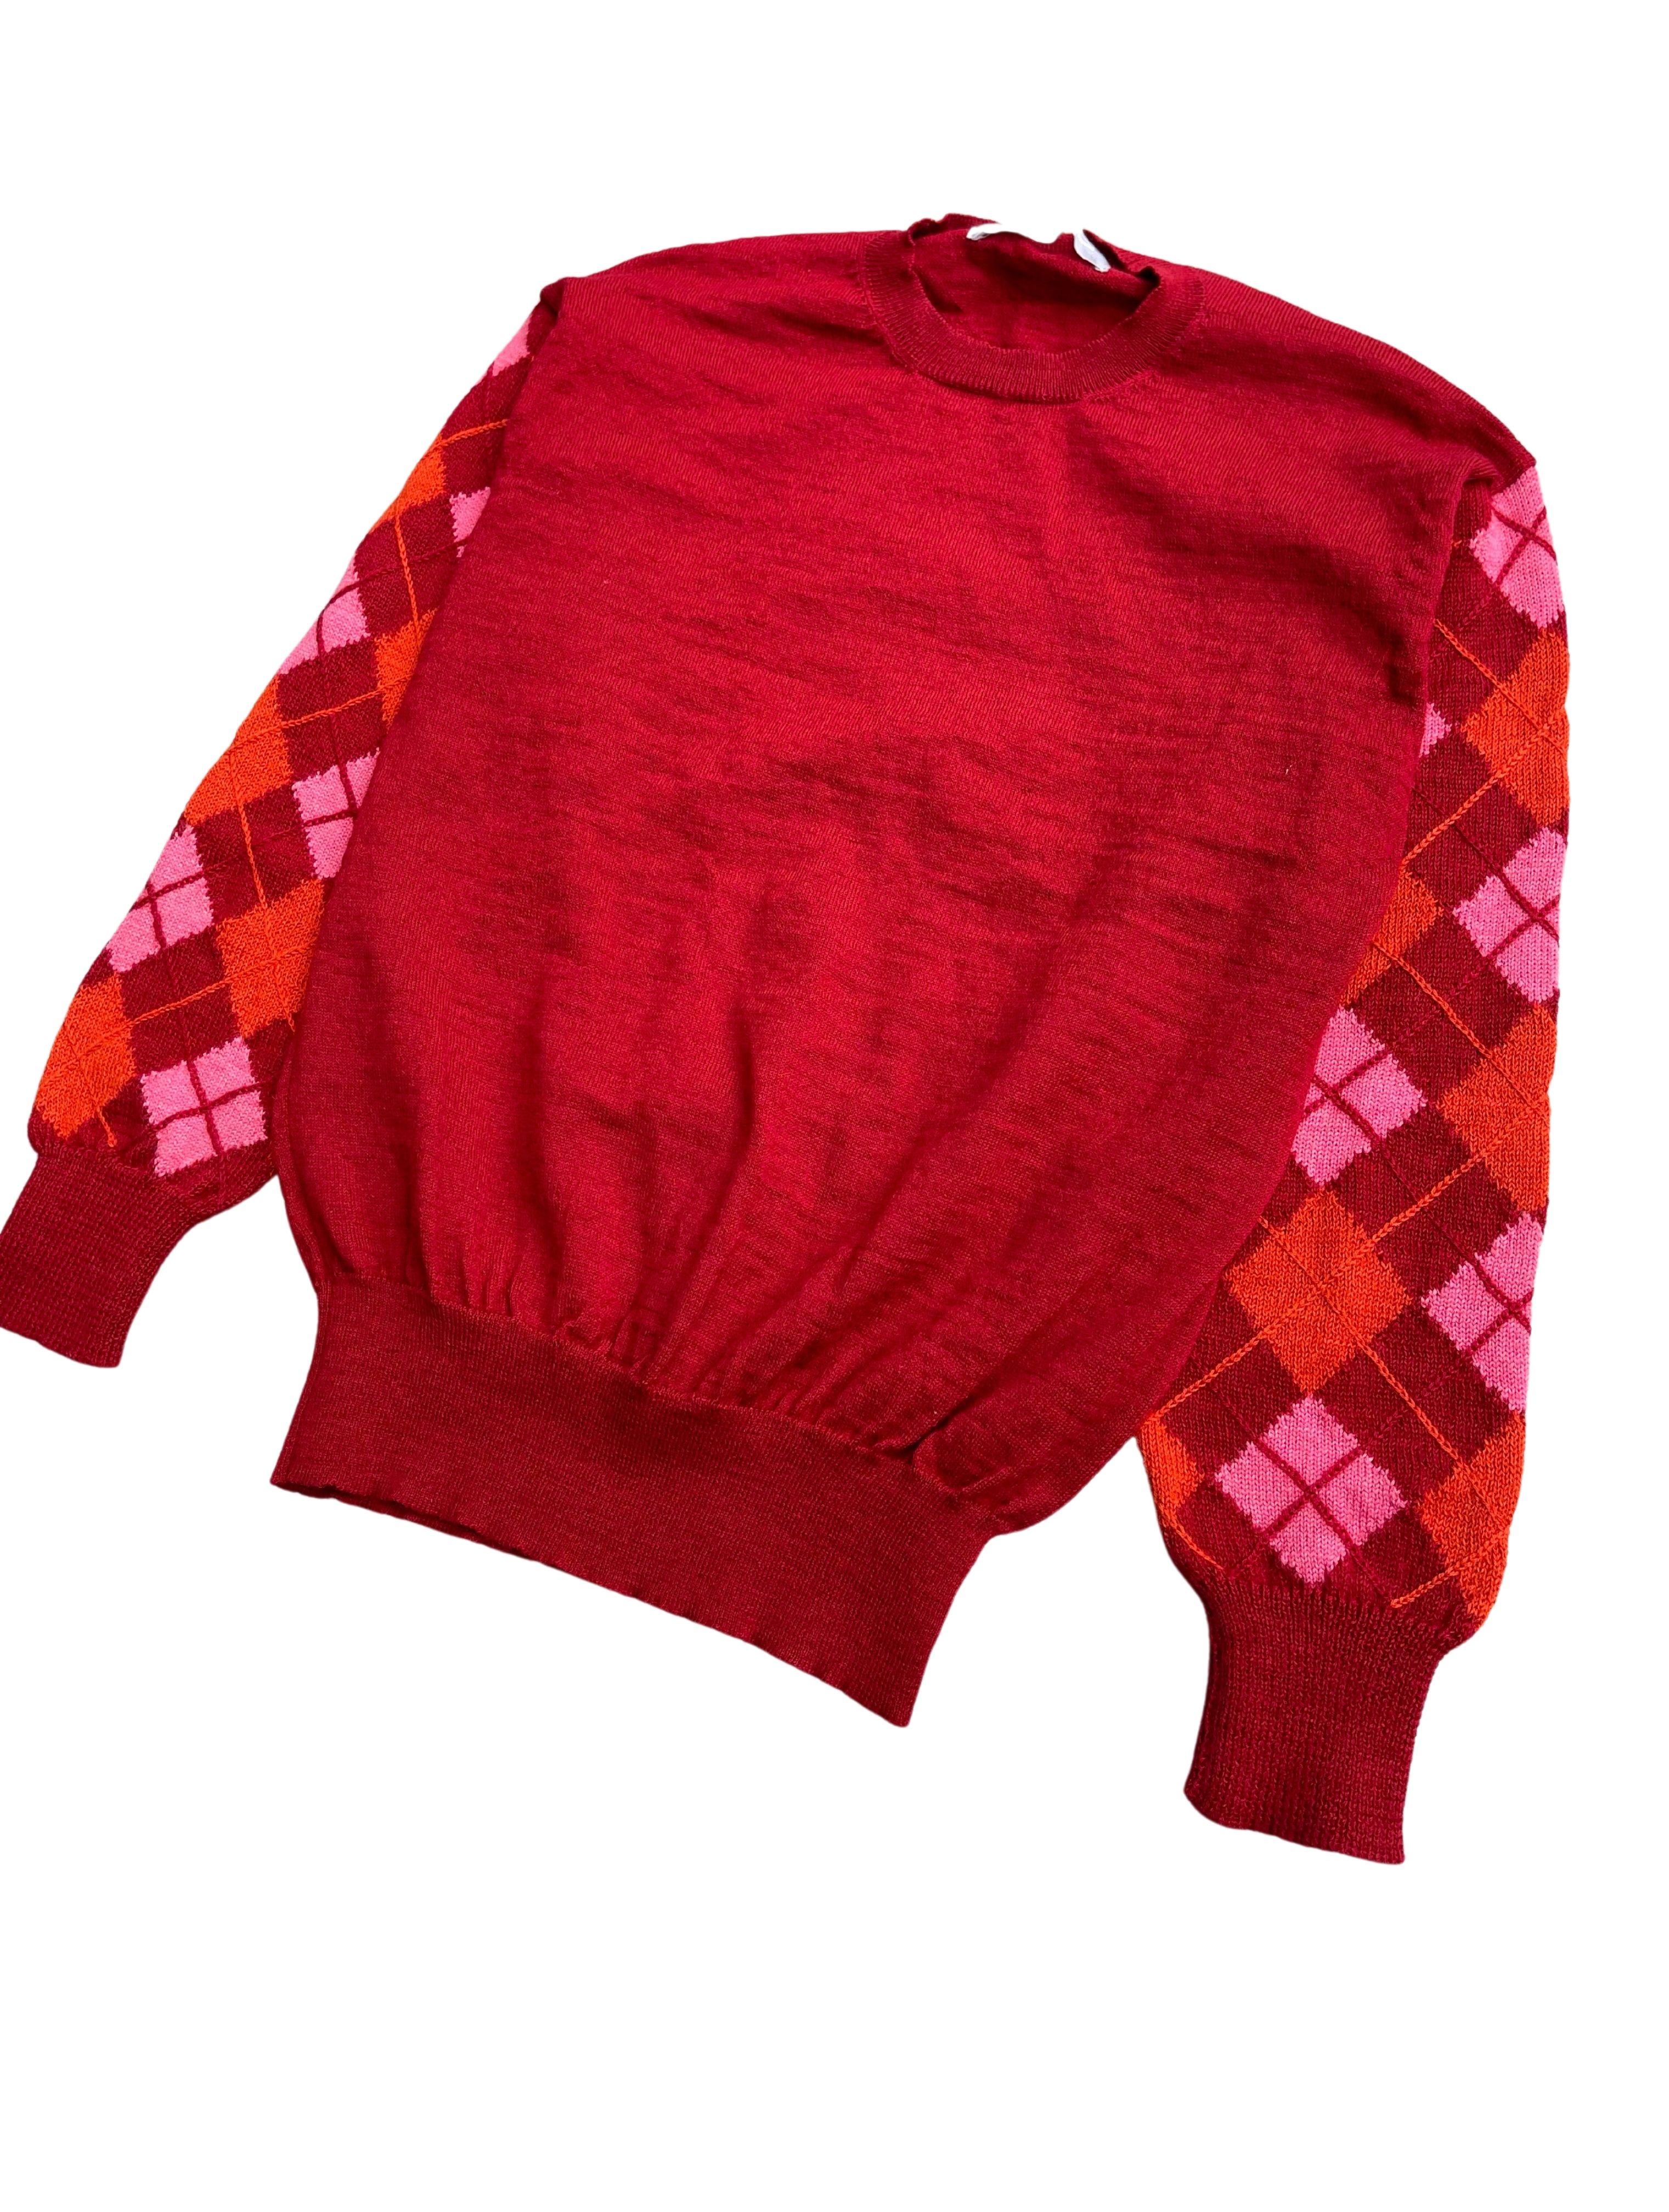 Comme des Garcons Homme Argyle Sleeve Sweater, Autumn Winter 2000 In Good Condition For Sale In Seattle, WA